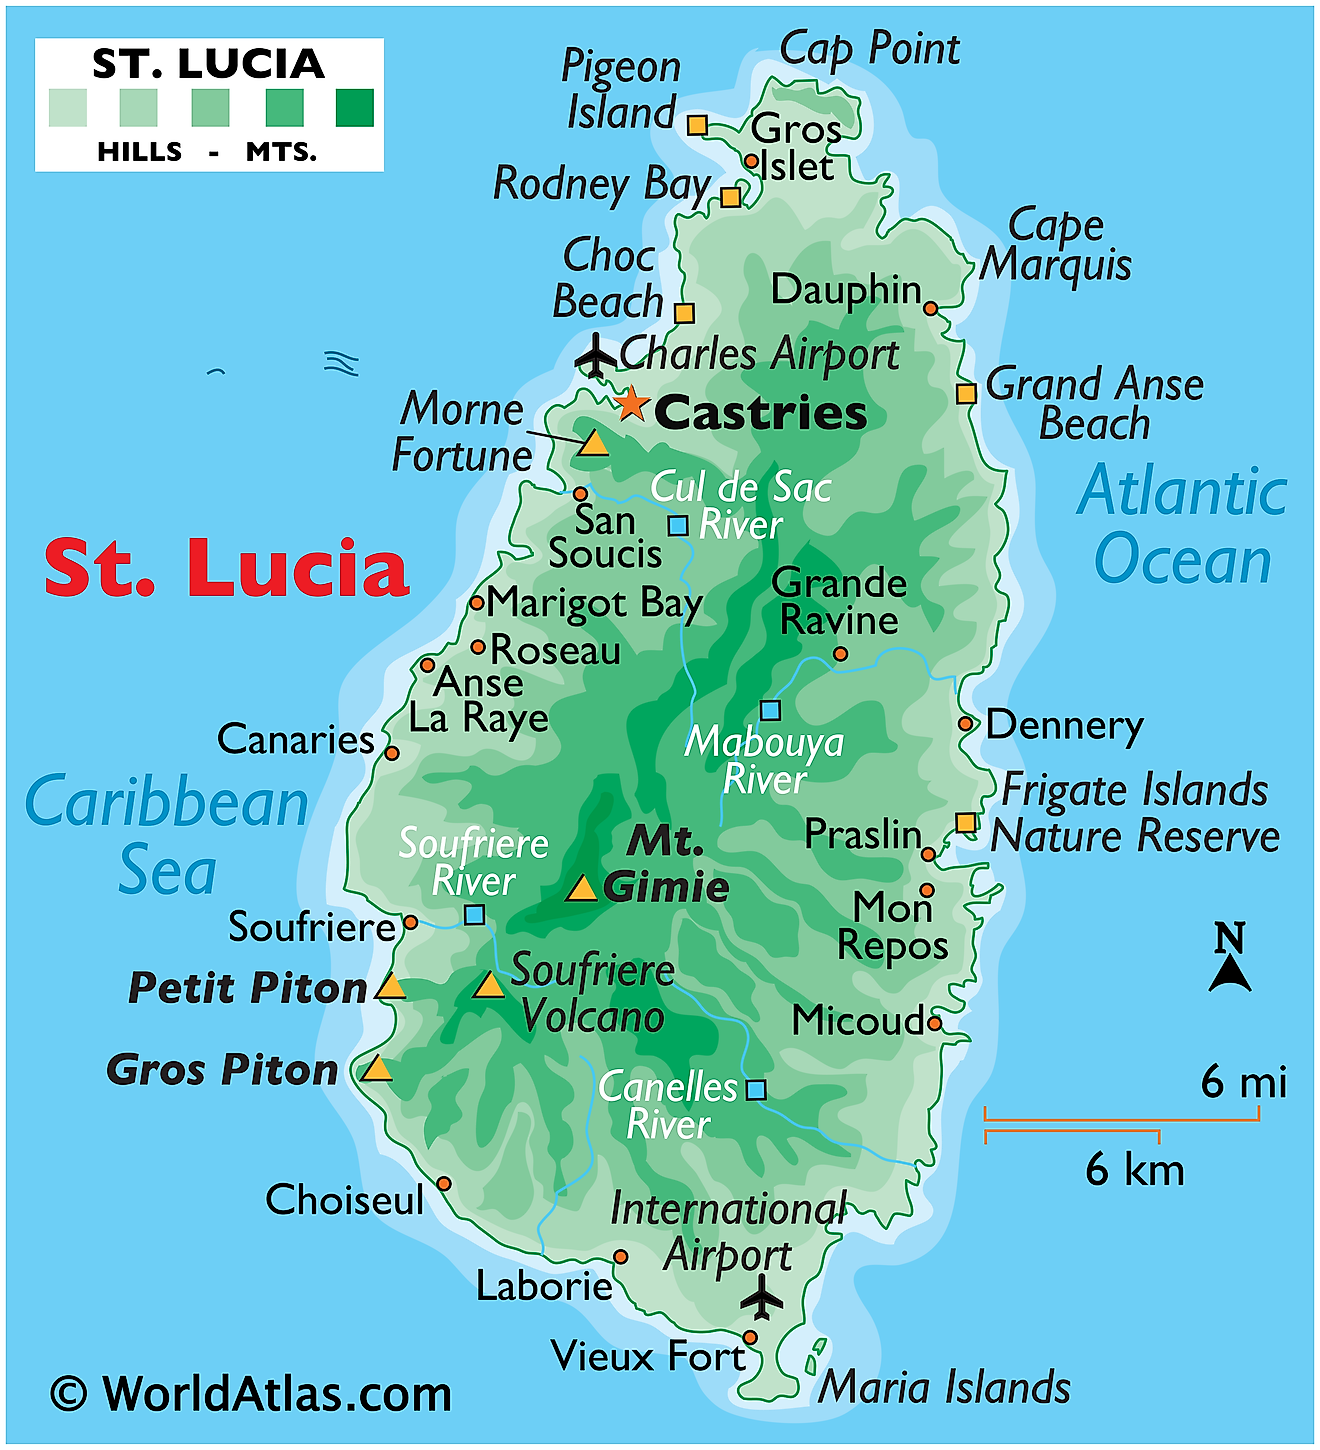 Physical Map of Saint Lucia showing relief, islands, mountains, smaller islands, volcanoes, rivers, and more.